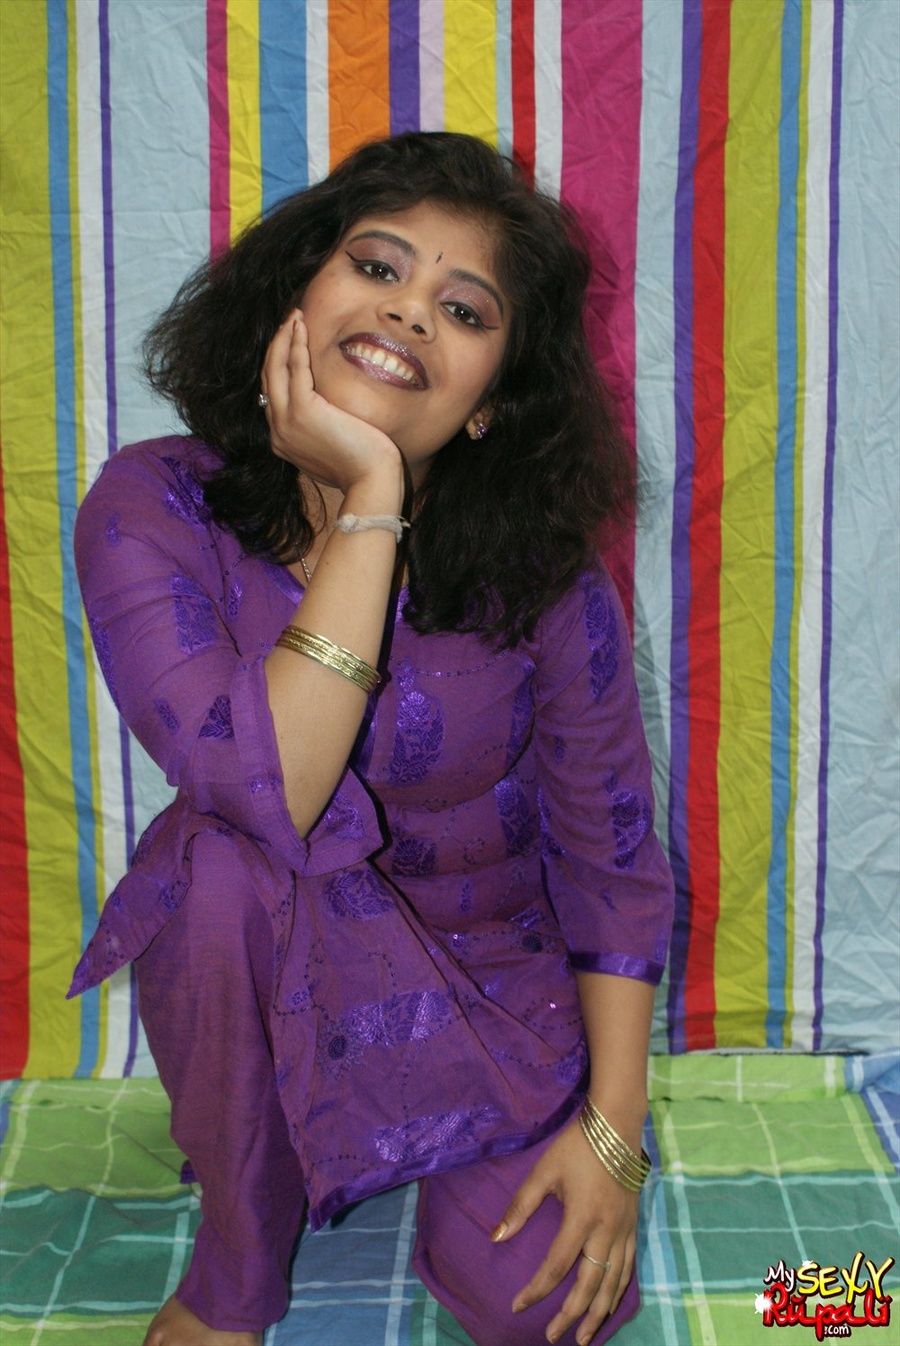 Sexy Indian fatty in purple sari takes it off to demonstrate her chubby delights - XXXonXXX - Pic 4